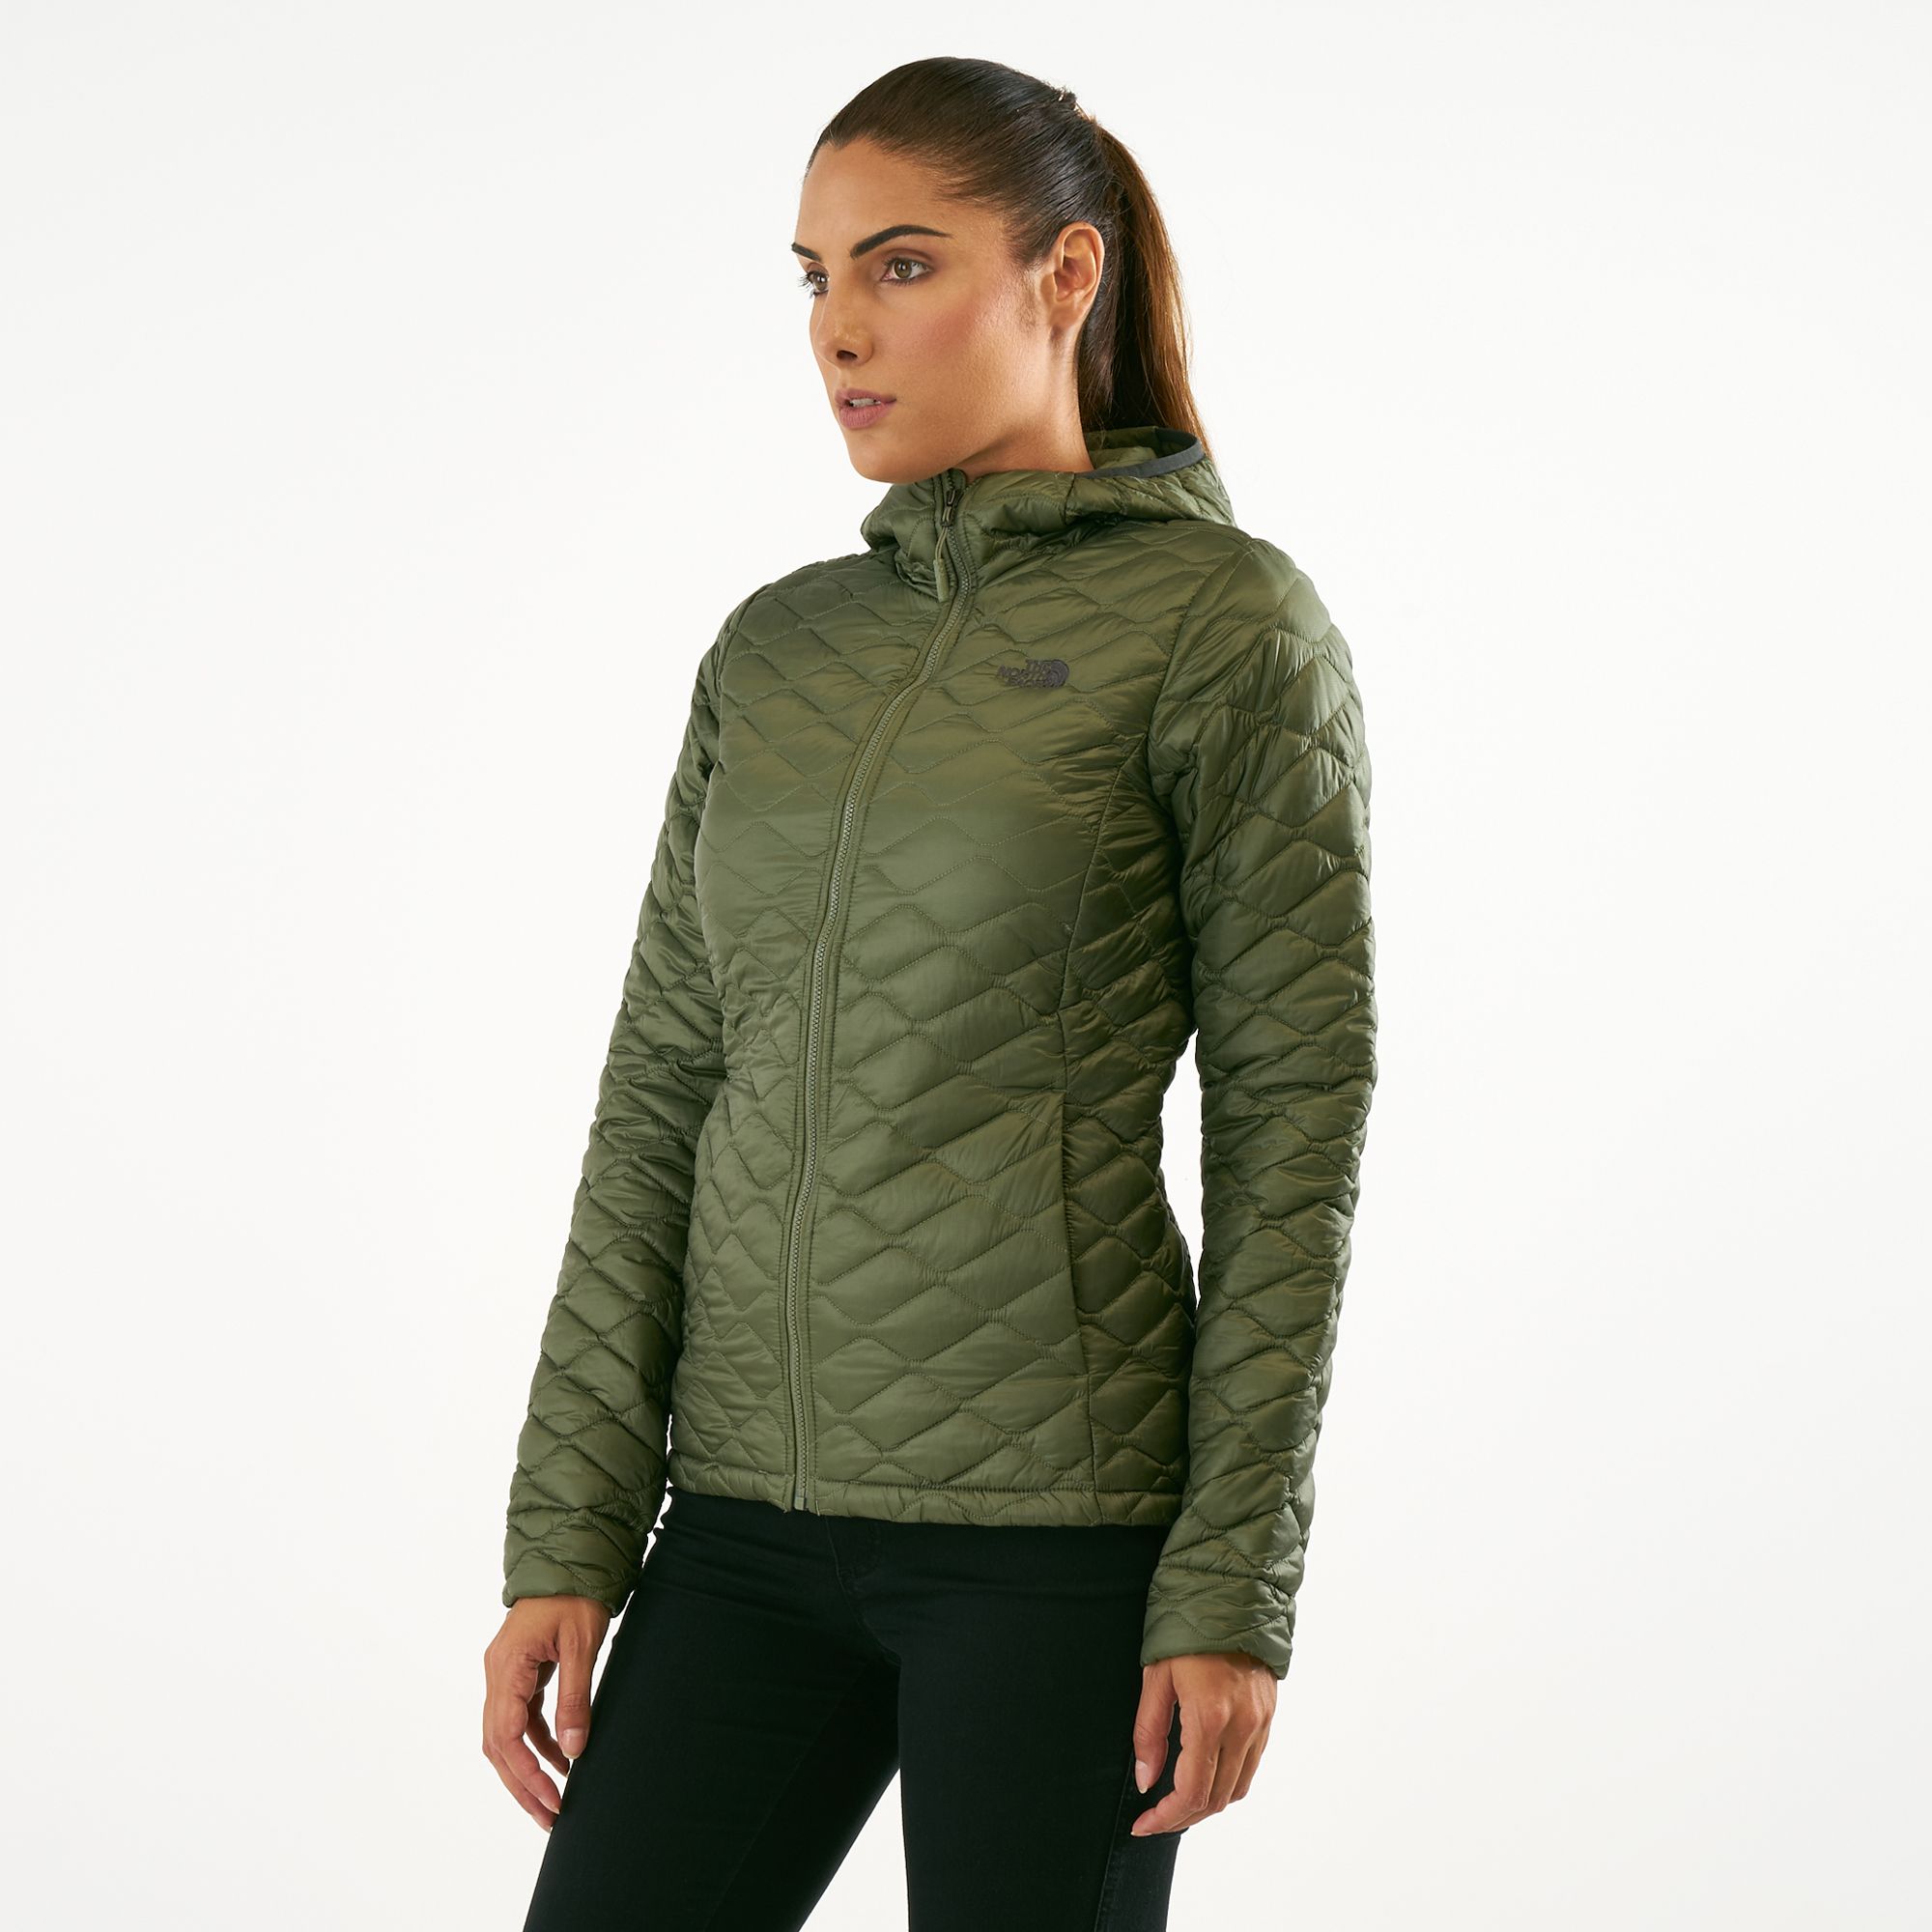 north face thermoball hoodie jacket women's